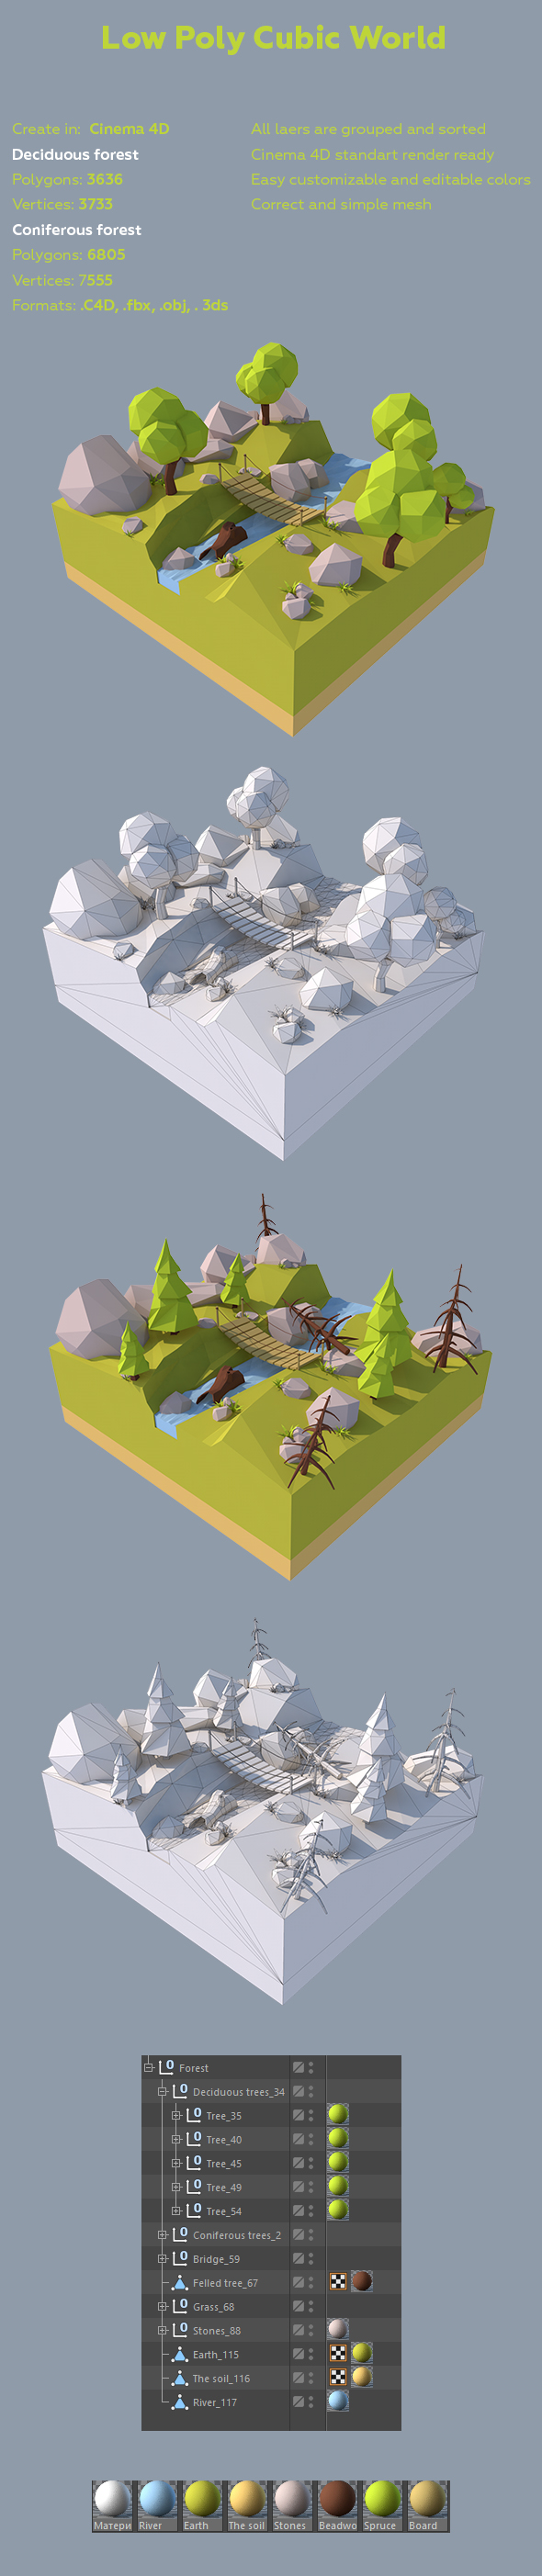 Low Poly Forest - 3Docean 24262893